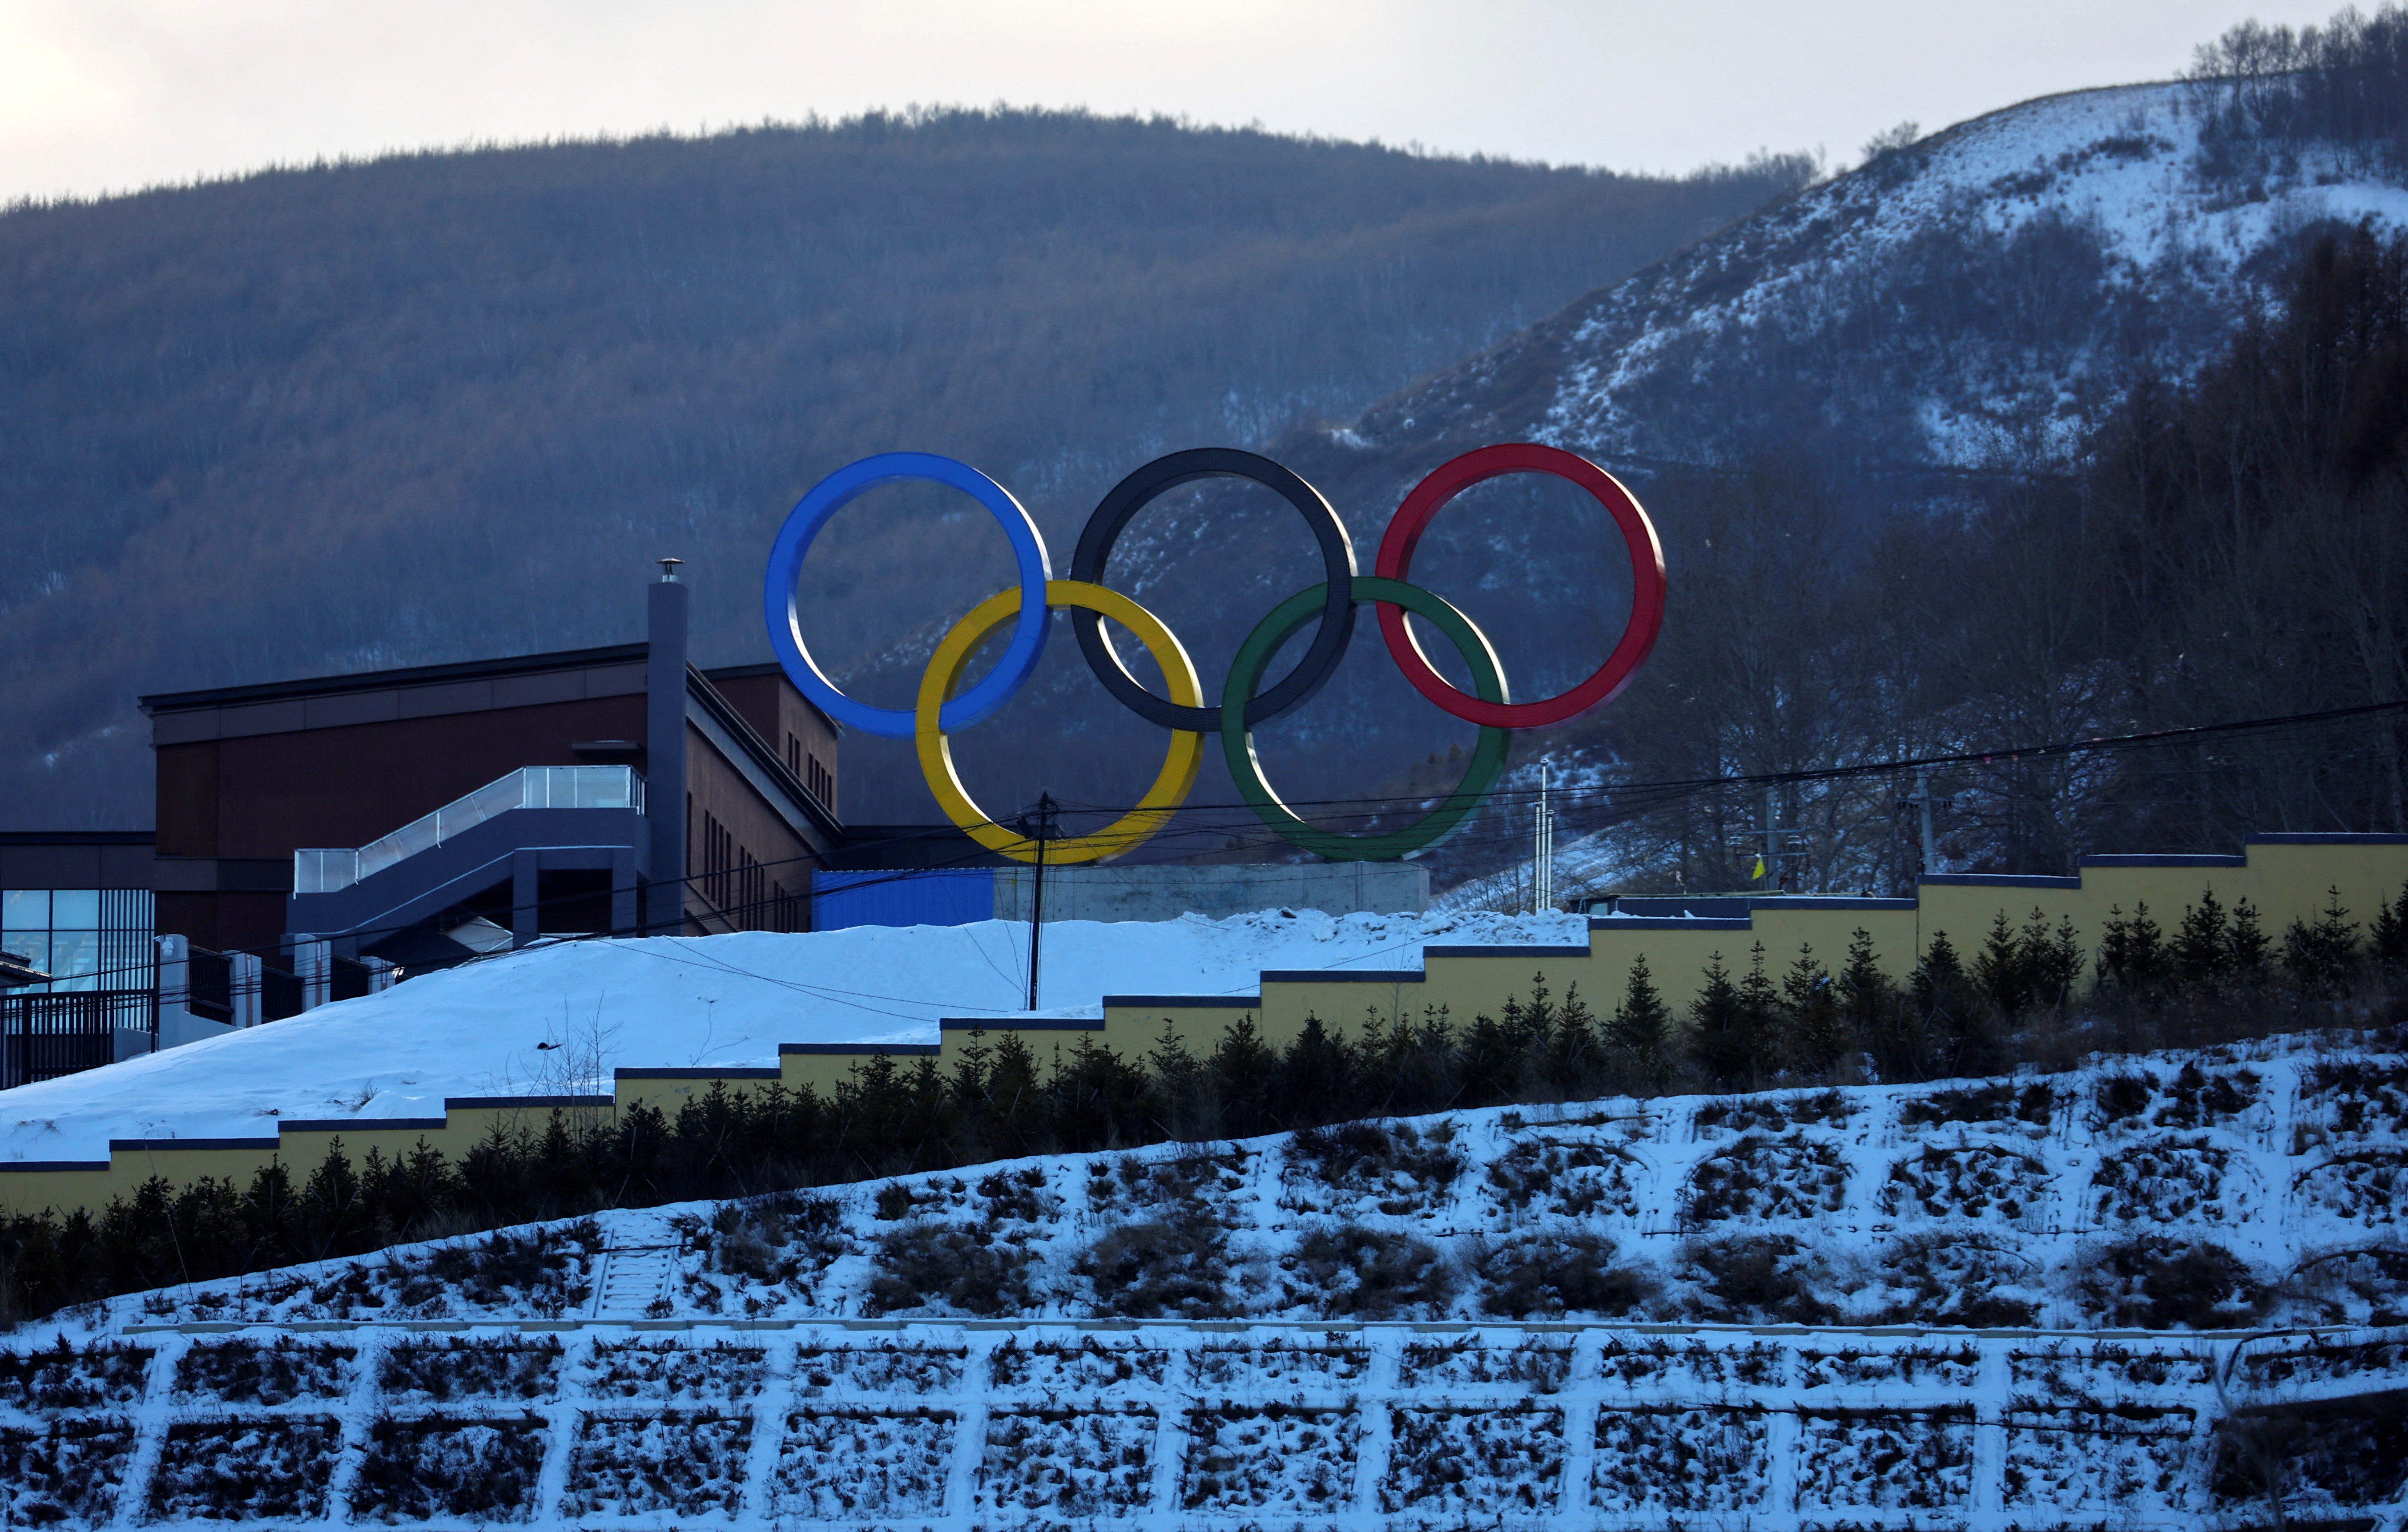 The Olympic rings at the Zhangjiakou ski zone in China. It’s not the first time that fake snow has been deployed at the Winter Olympics - but it is the first time that the games will be run entirely on artificial powder